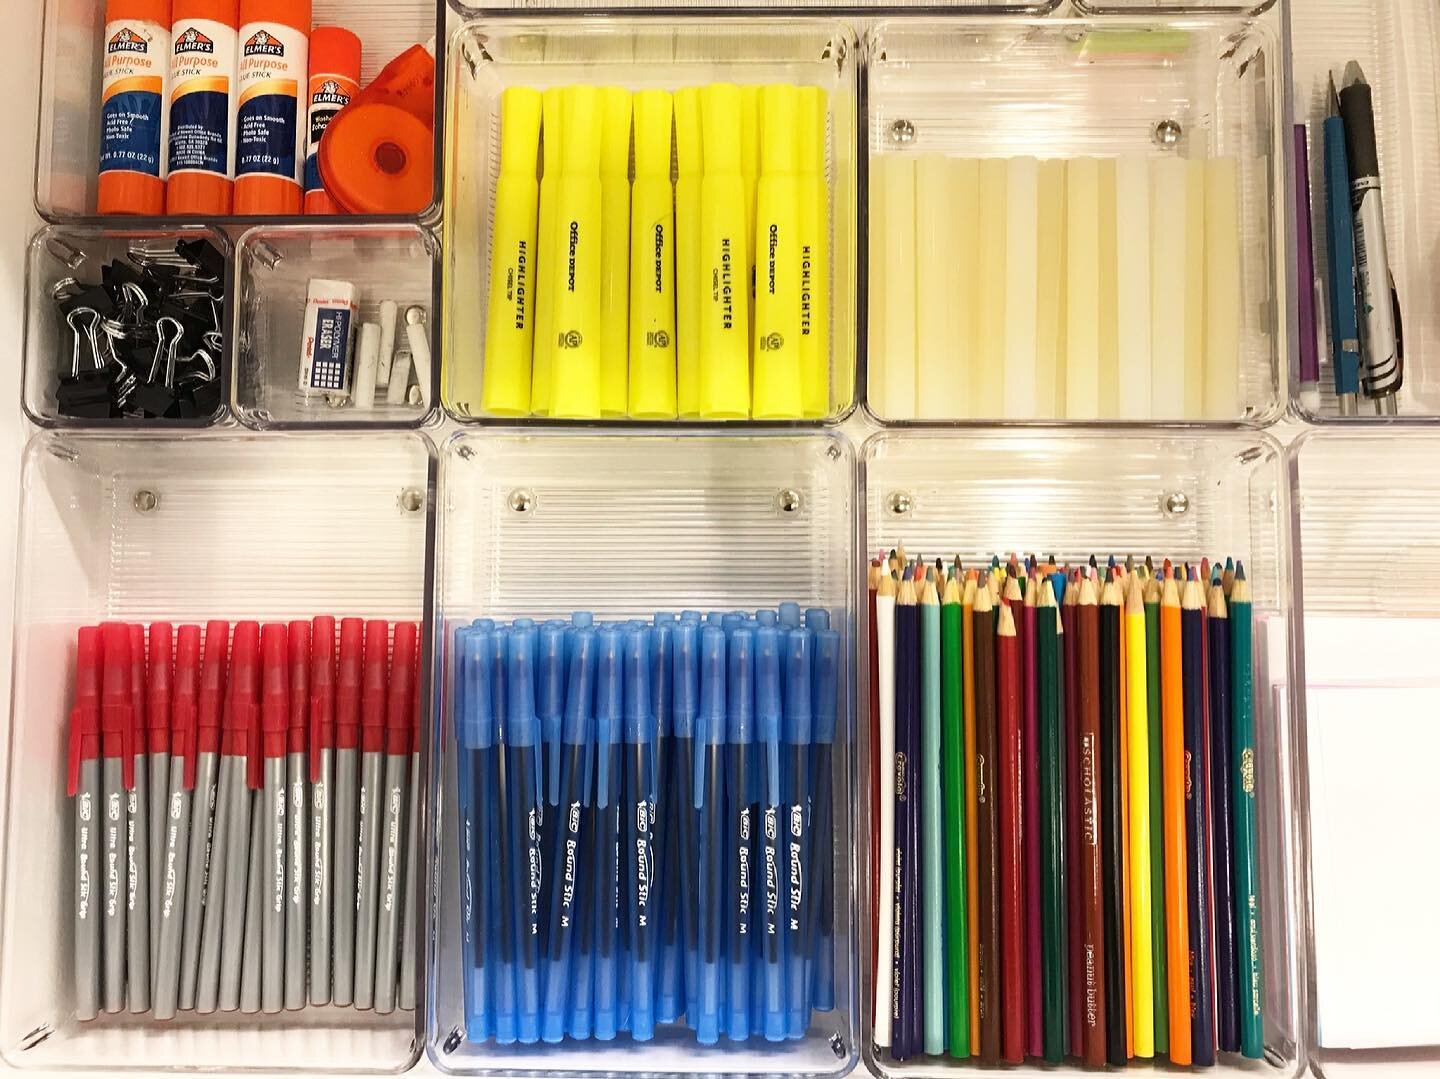 Grab your pen (or pencil or highlighter or glue stick 🤣) + let&rsquo;s get to work! Have a great week 🌈 
.
.
#schoolsupplies #kitchen #kitchendrawer #penandpaper #gettowork #newweek #organization #crosswellorganizing